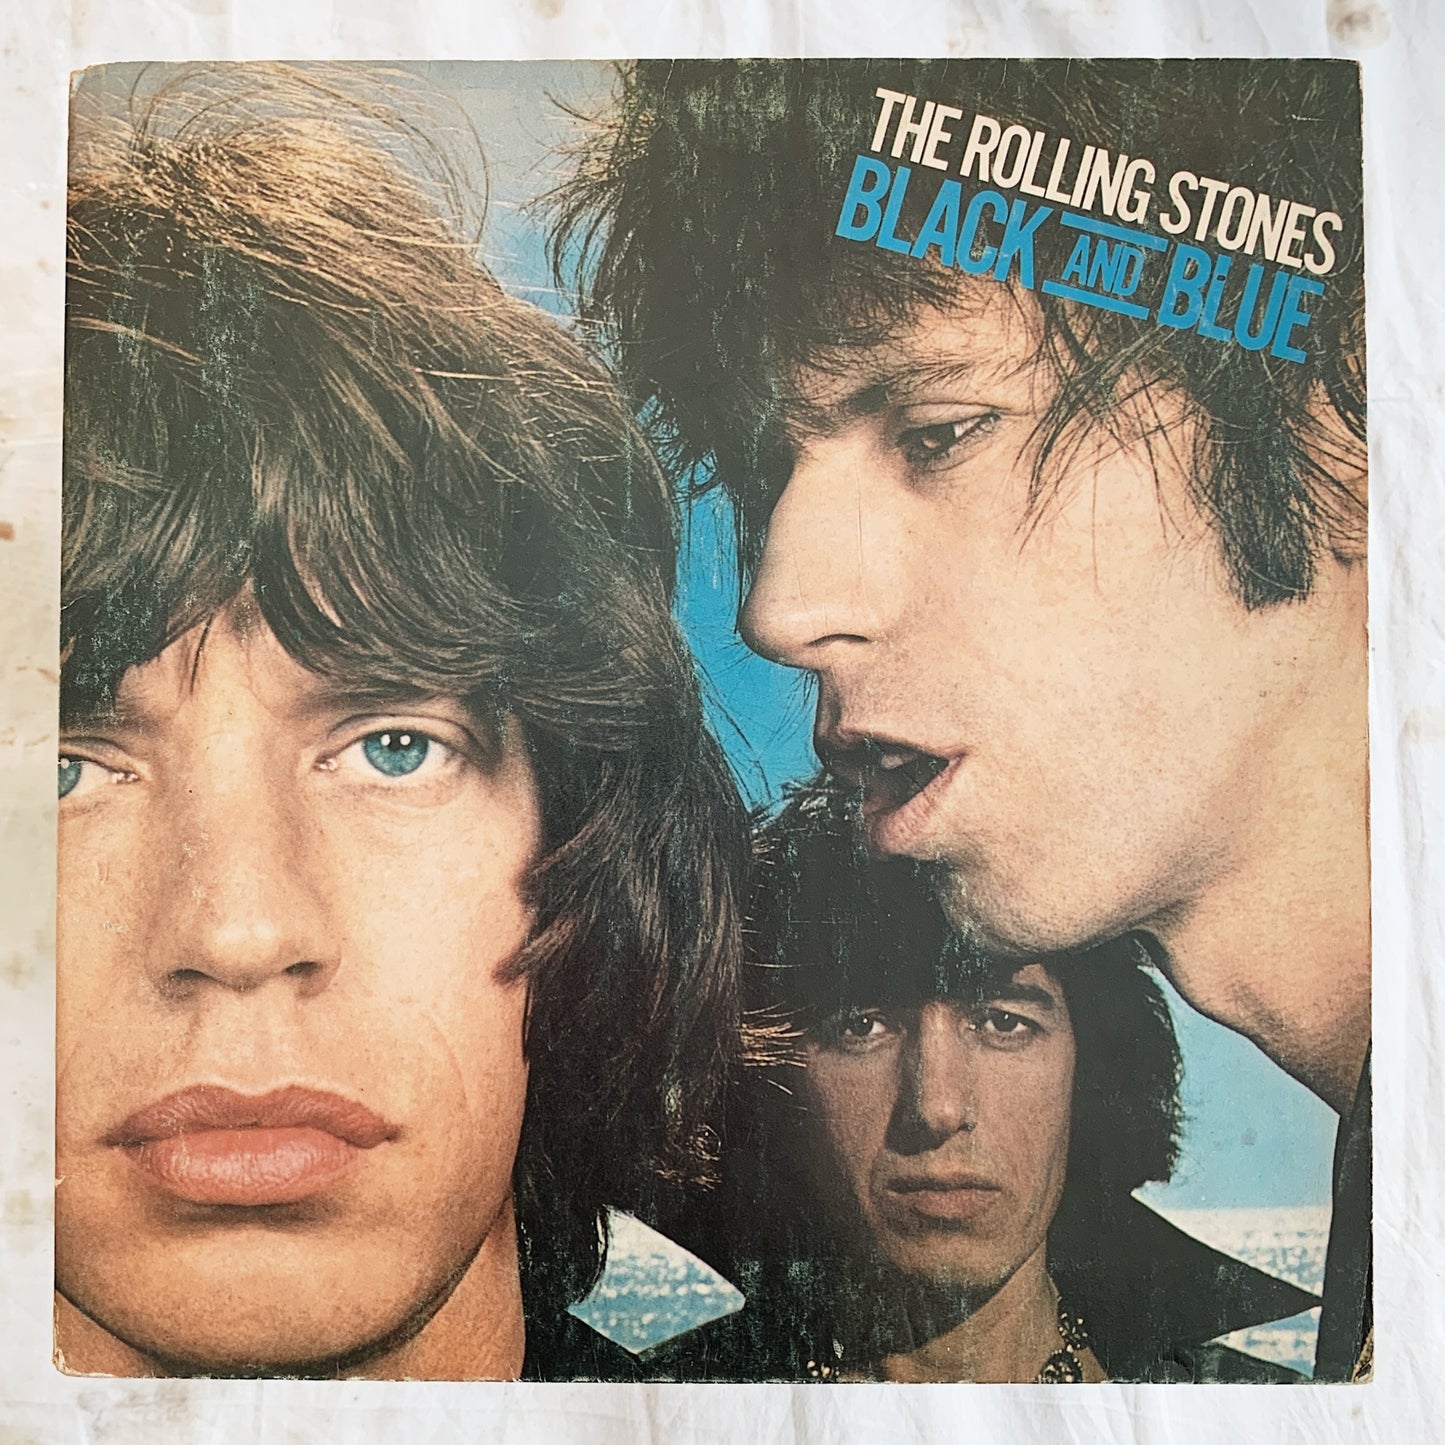 The Rolling Stones / Black and Blue LP